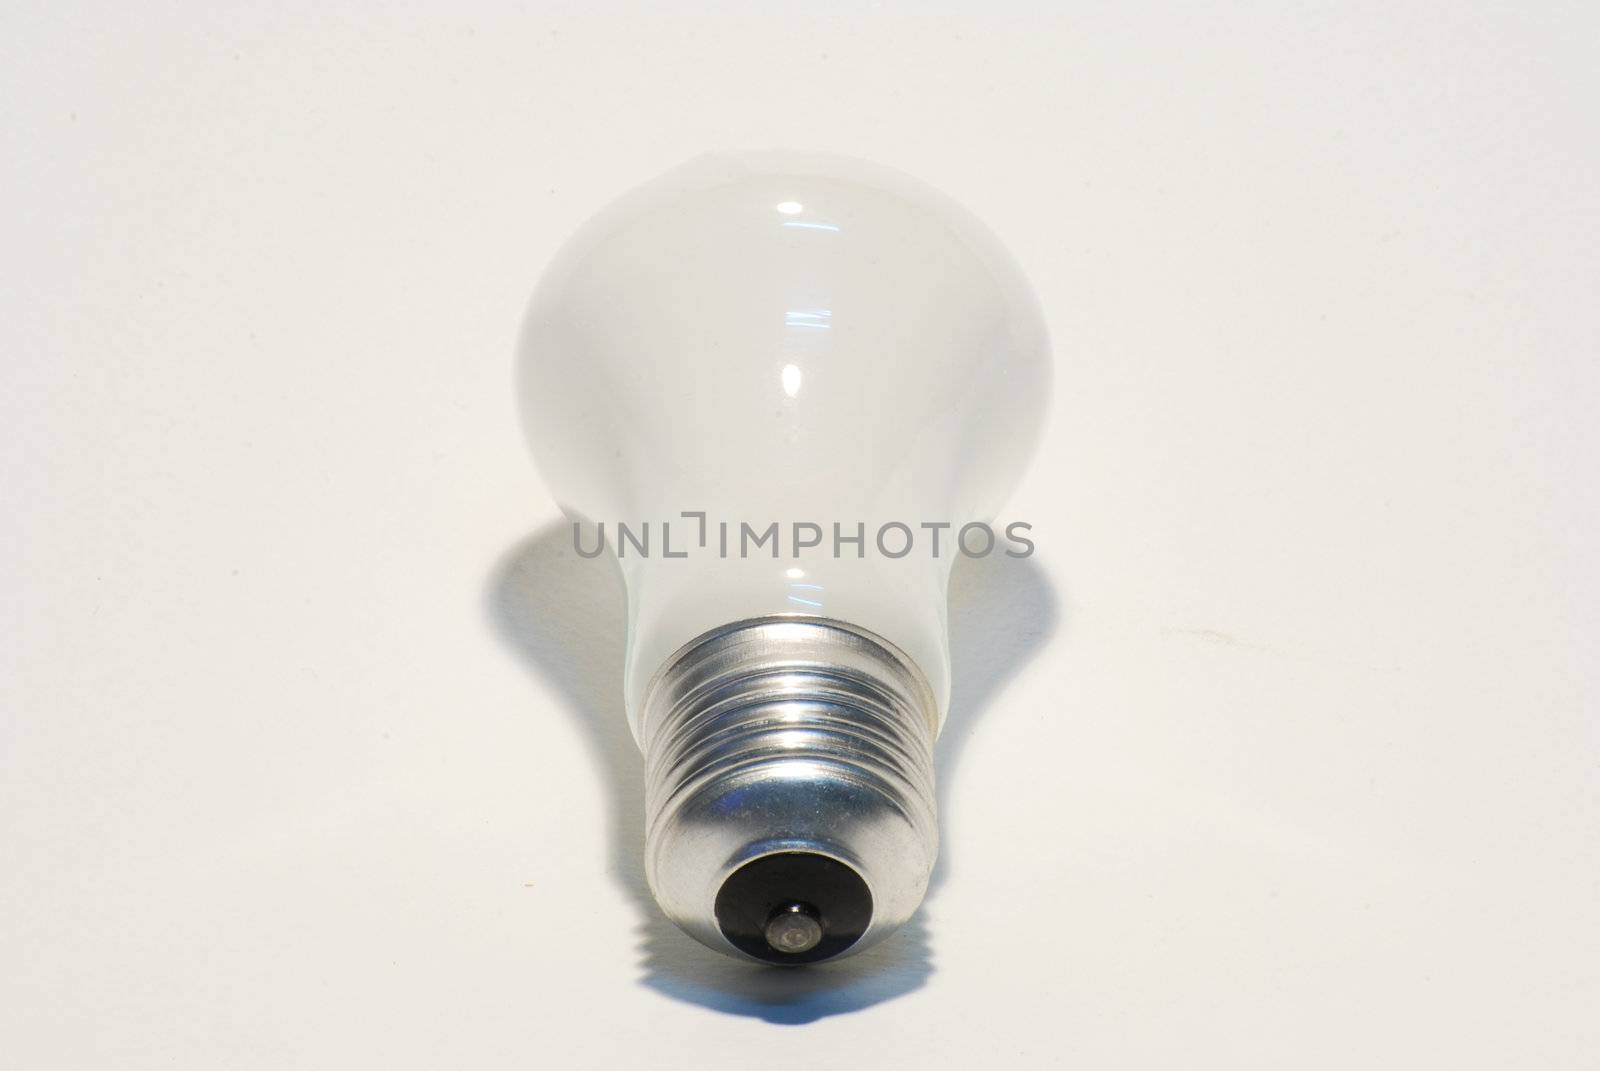 Isolated white fluorescent lamp on white background.